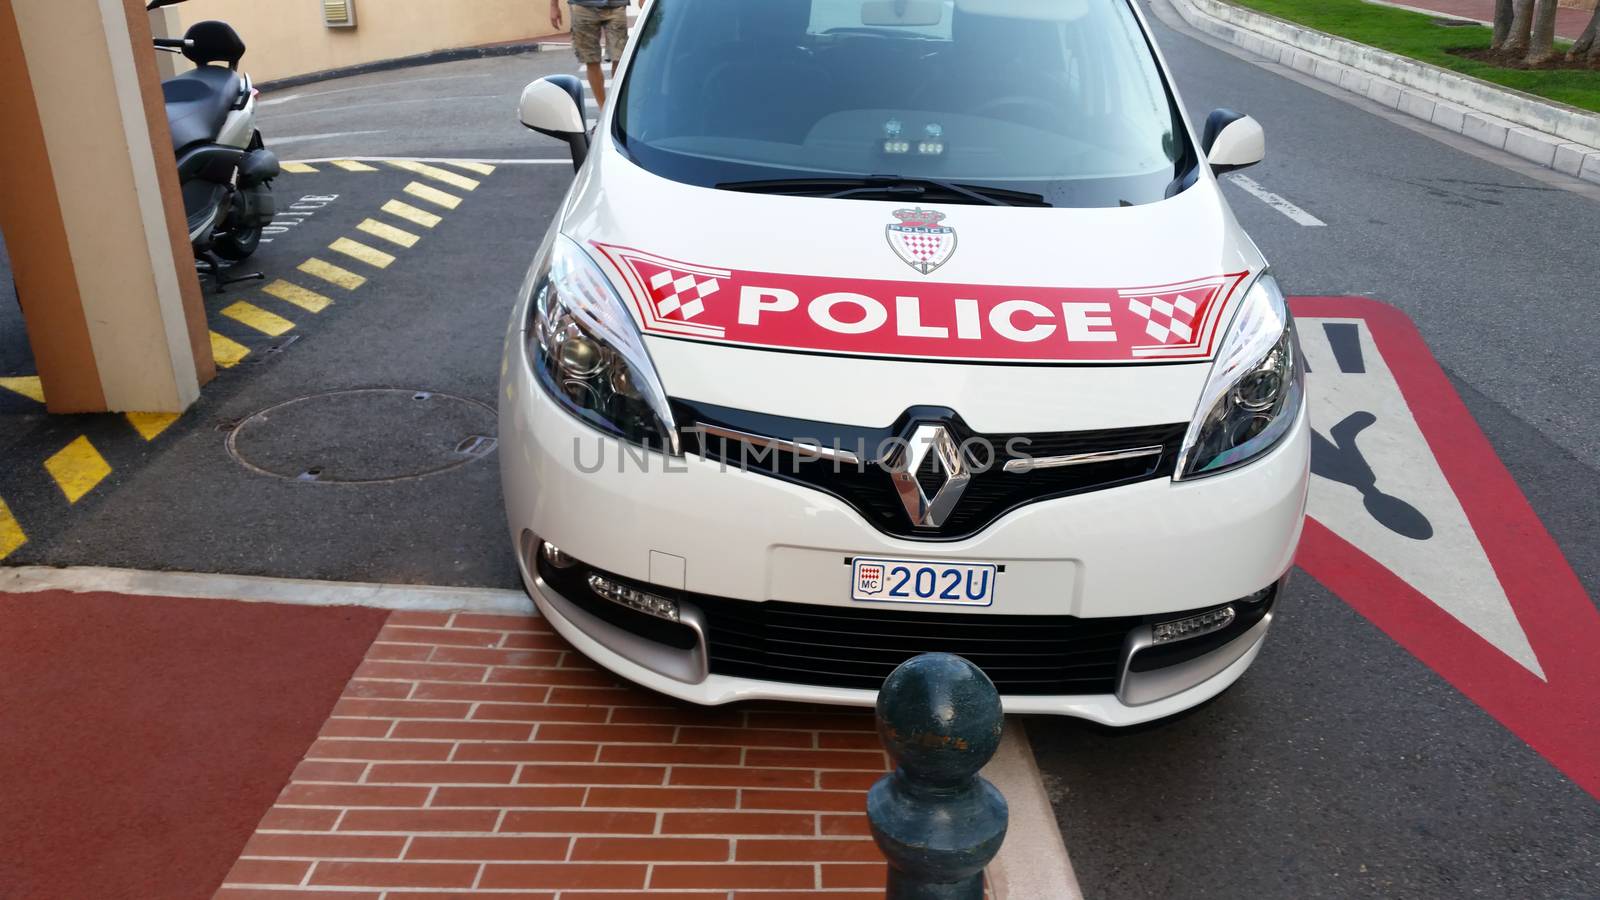 Monaco Police Car Parked On The Street, Front View by bensib